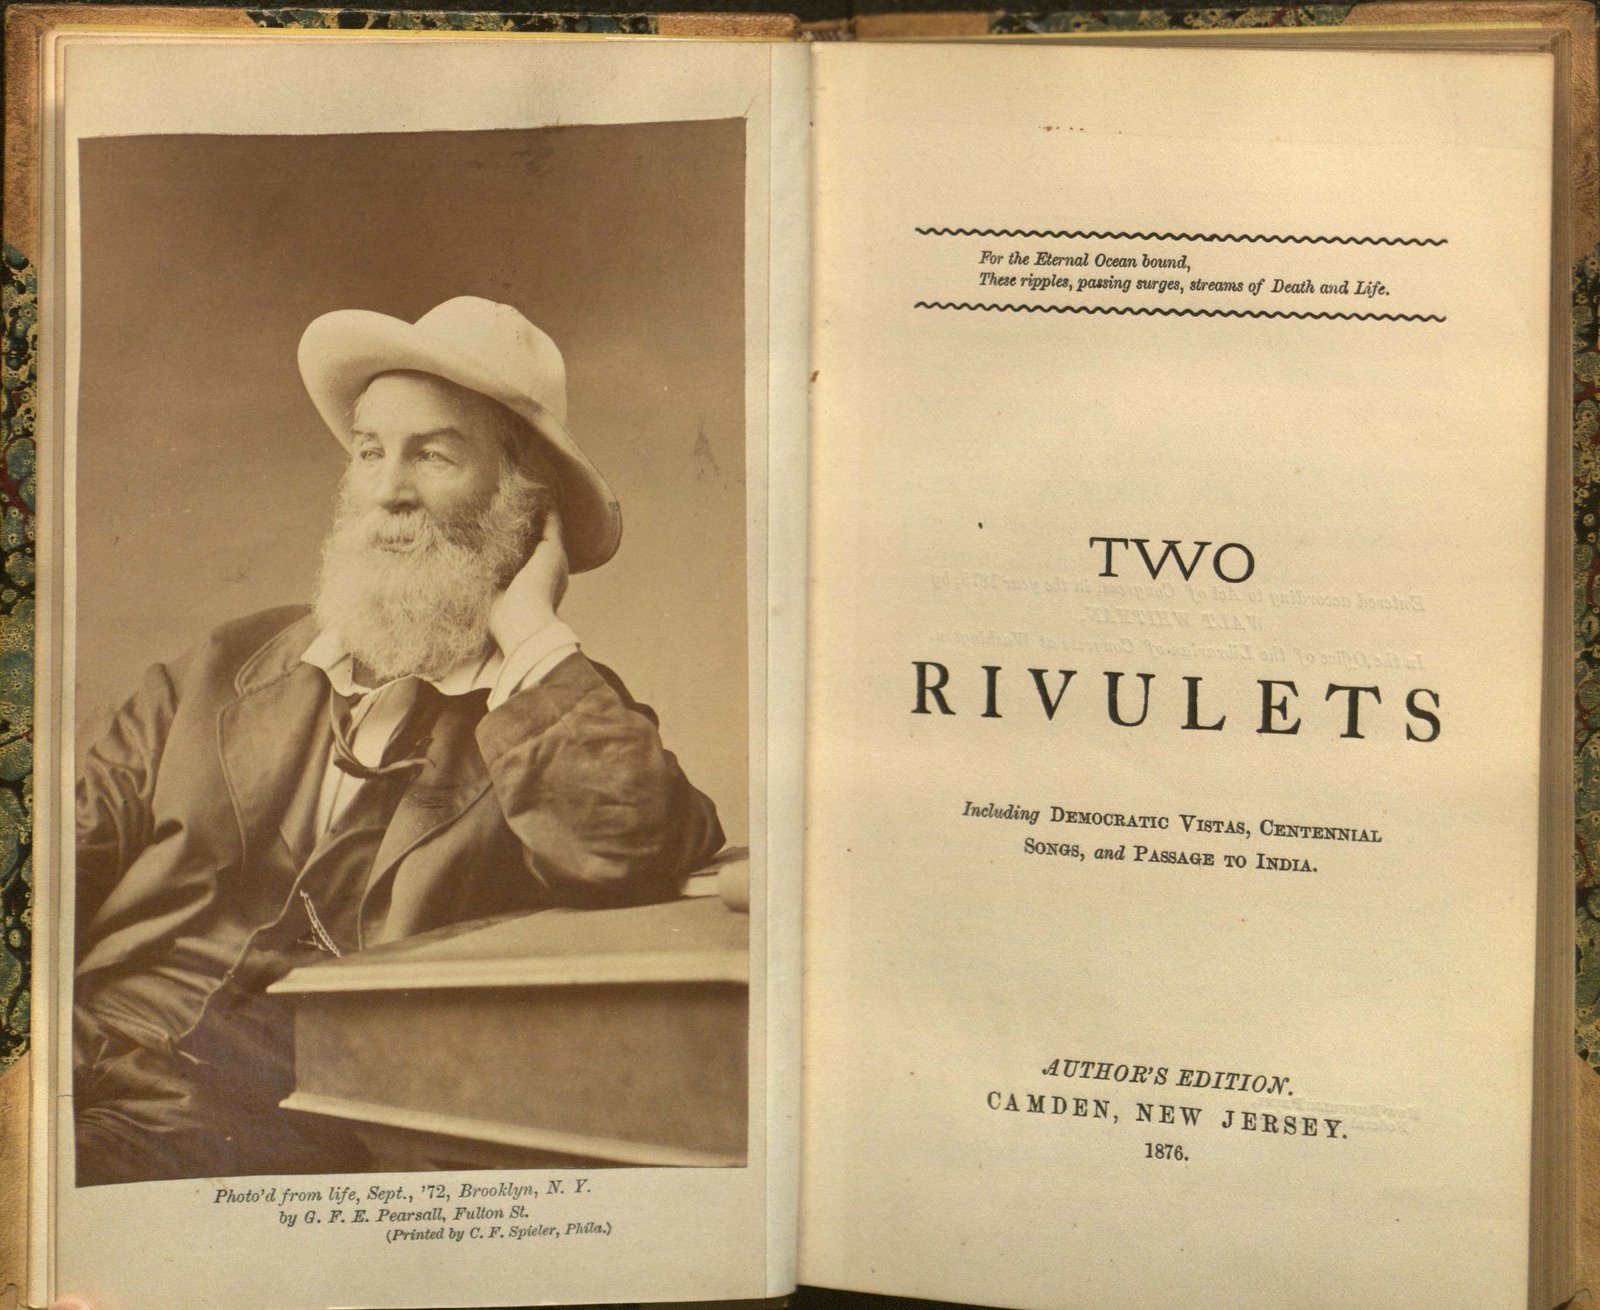 Title pages of Two Rivulets featuring a photograph of the author on the left page